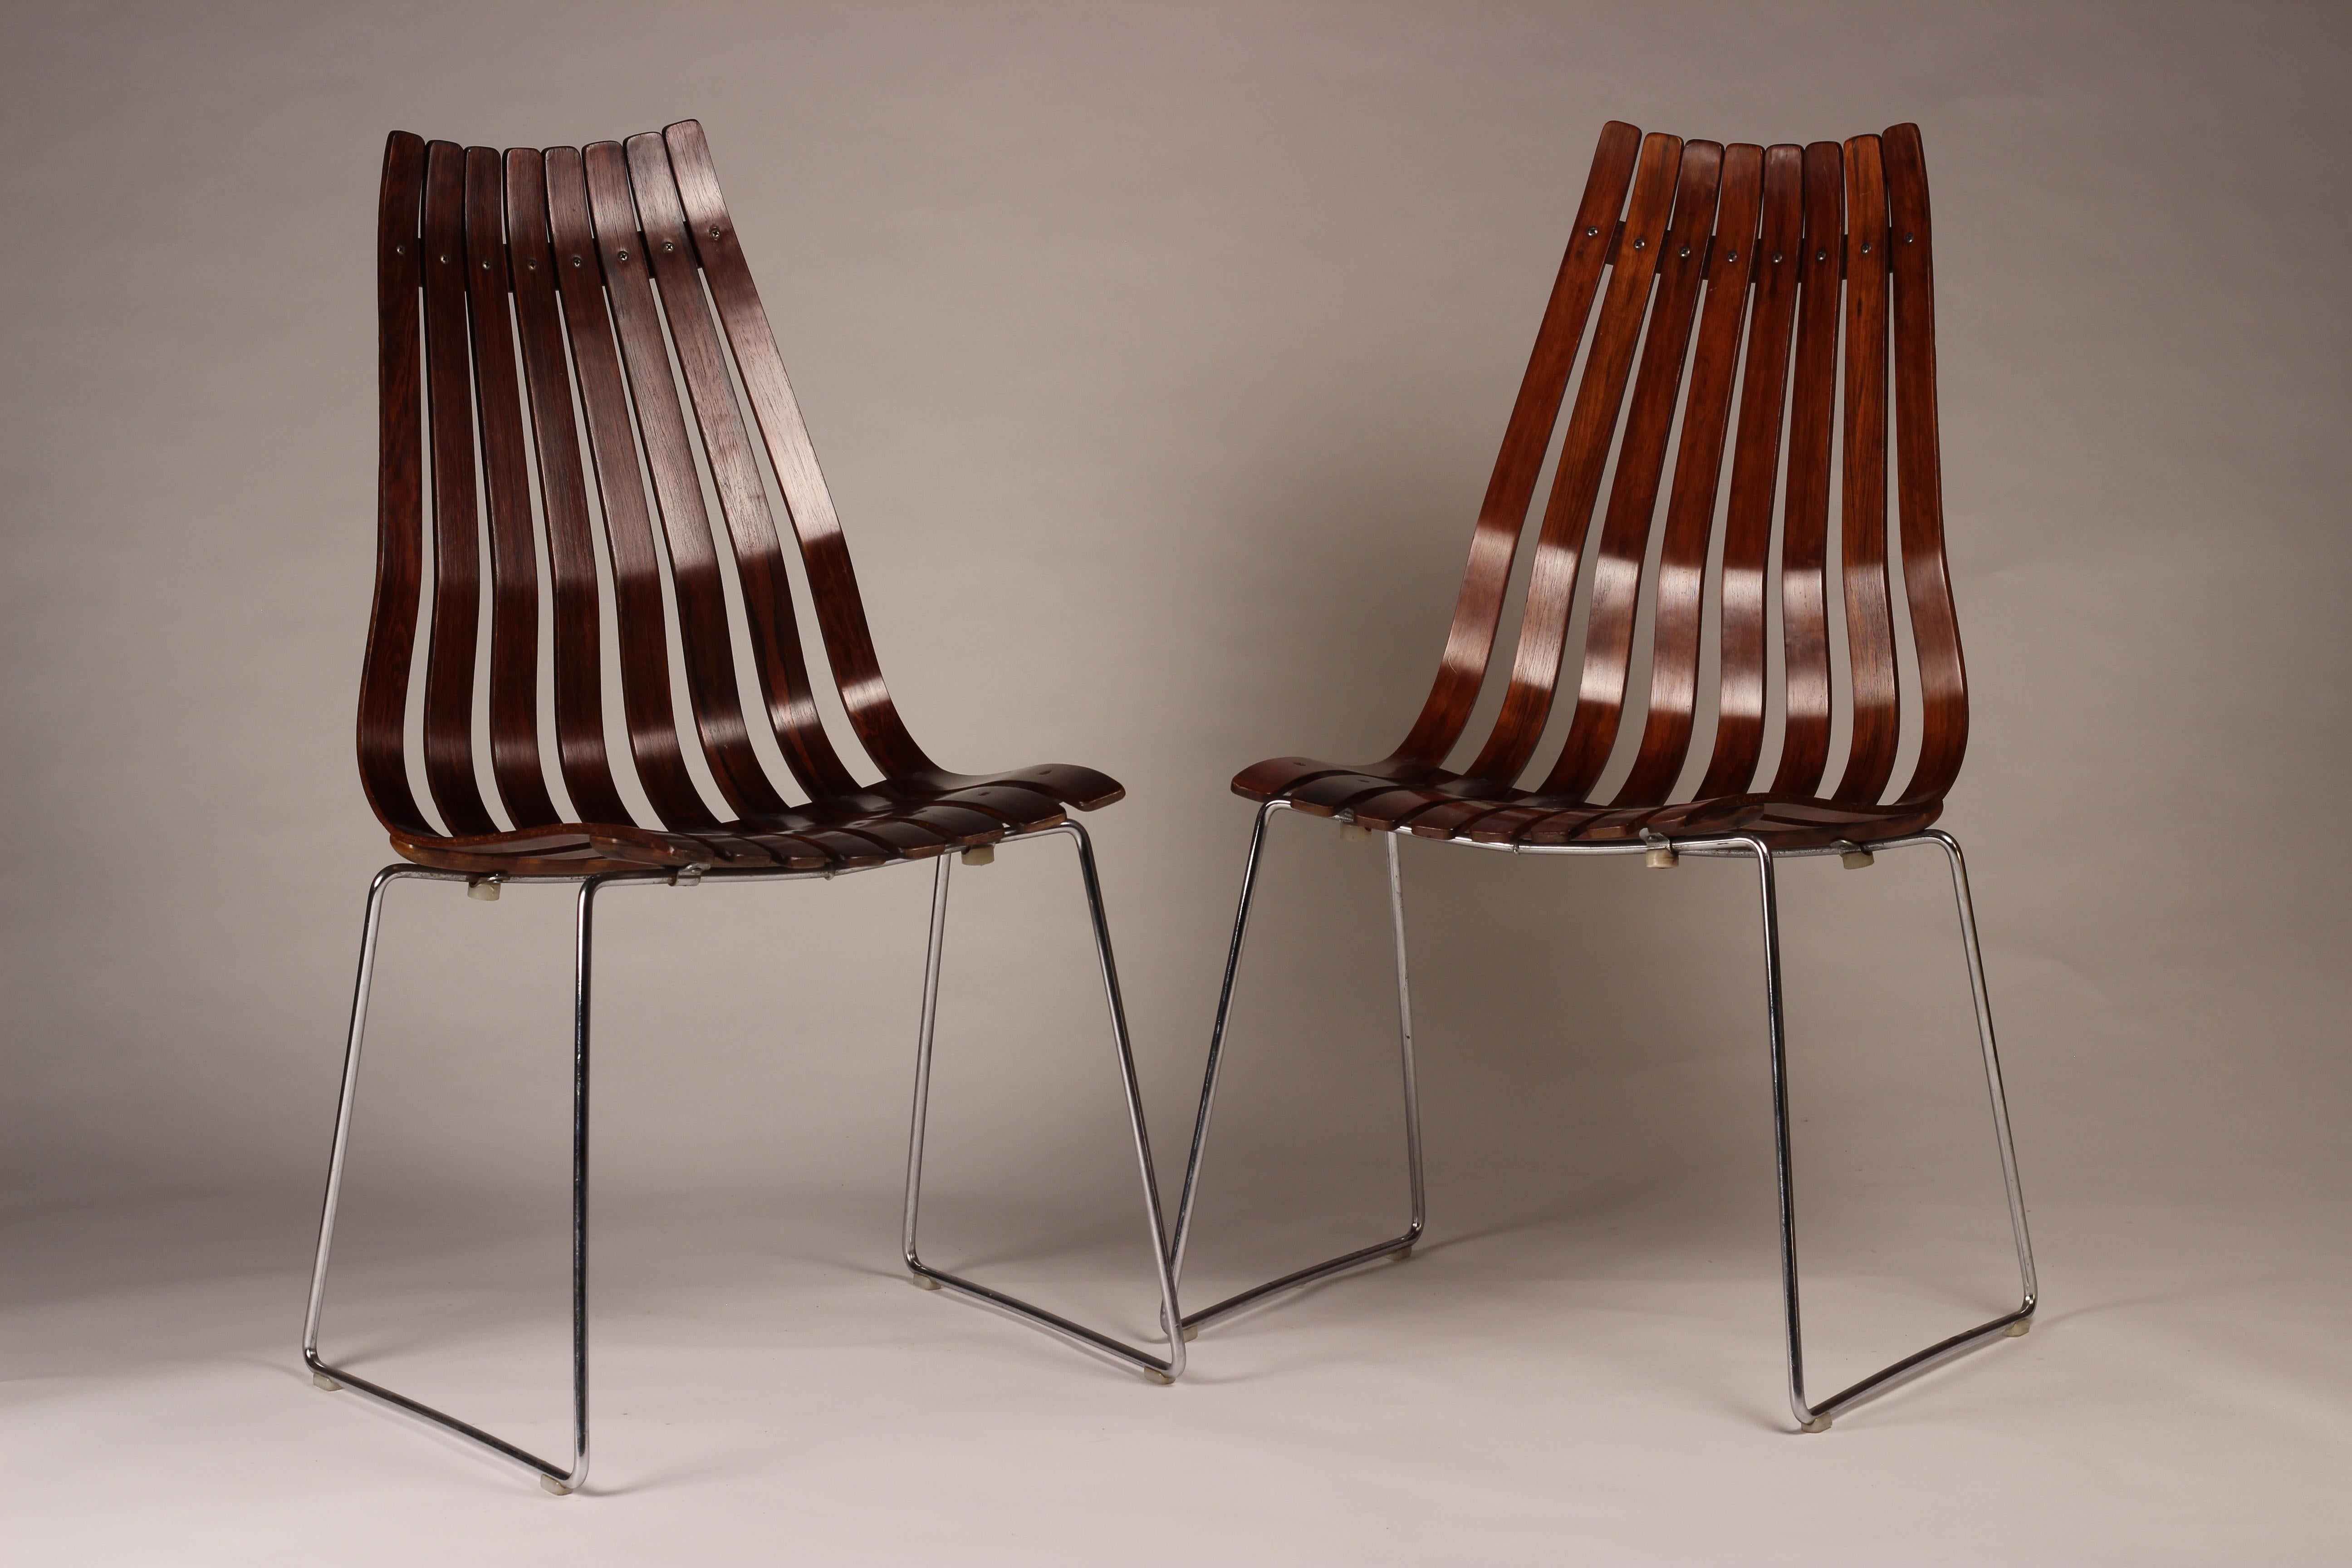 Mid-20th Century Scandinavian Modern Rosewood Dining Chairs by Hans Brattrud, Set of 2